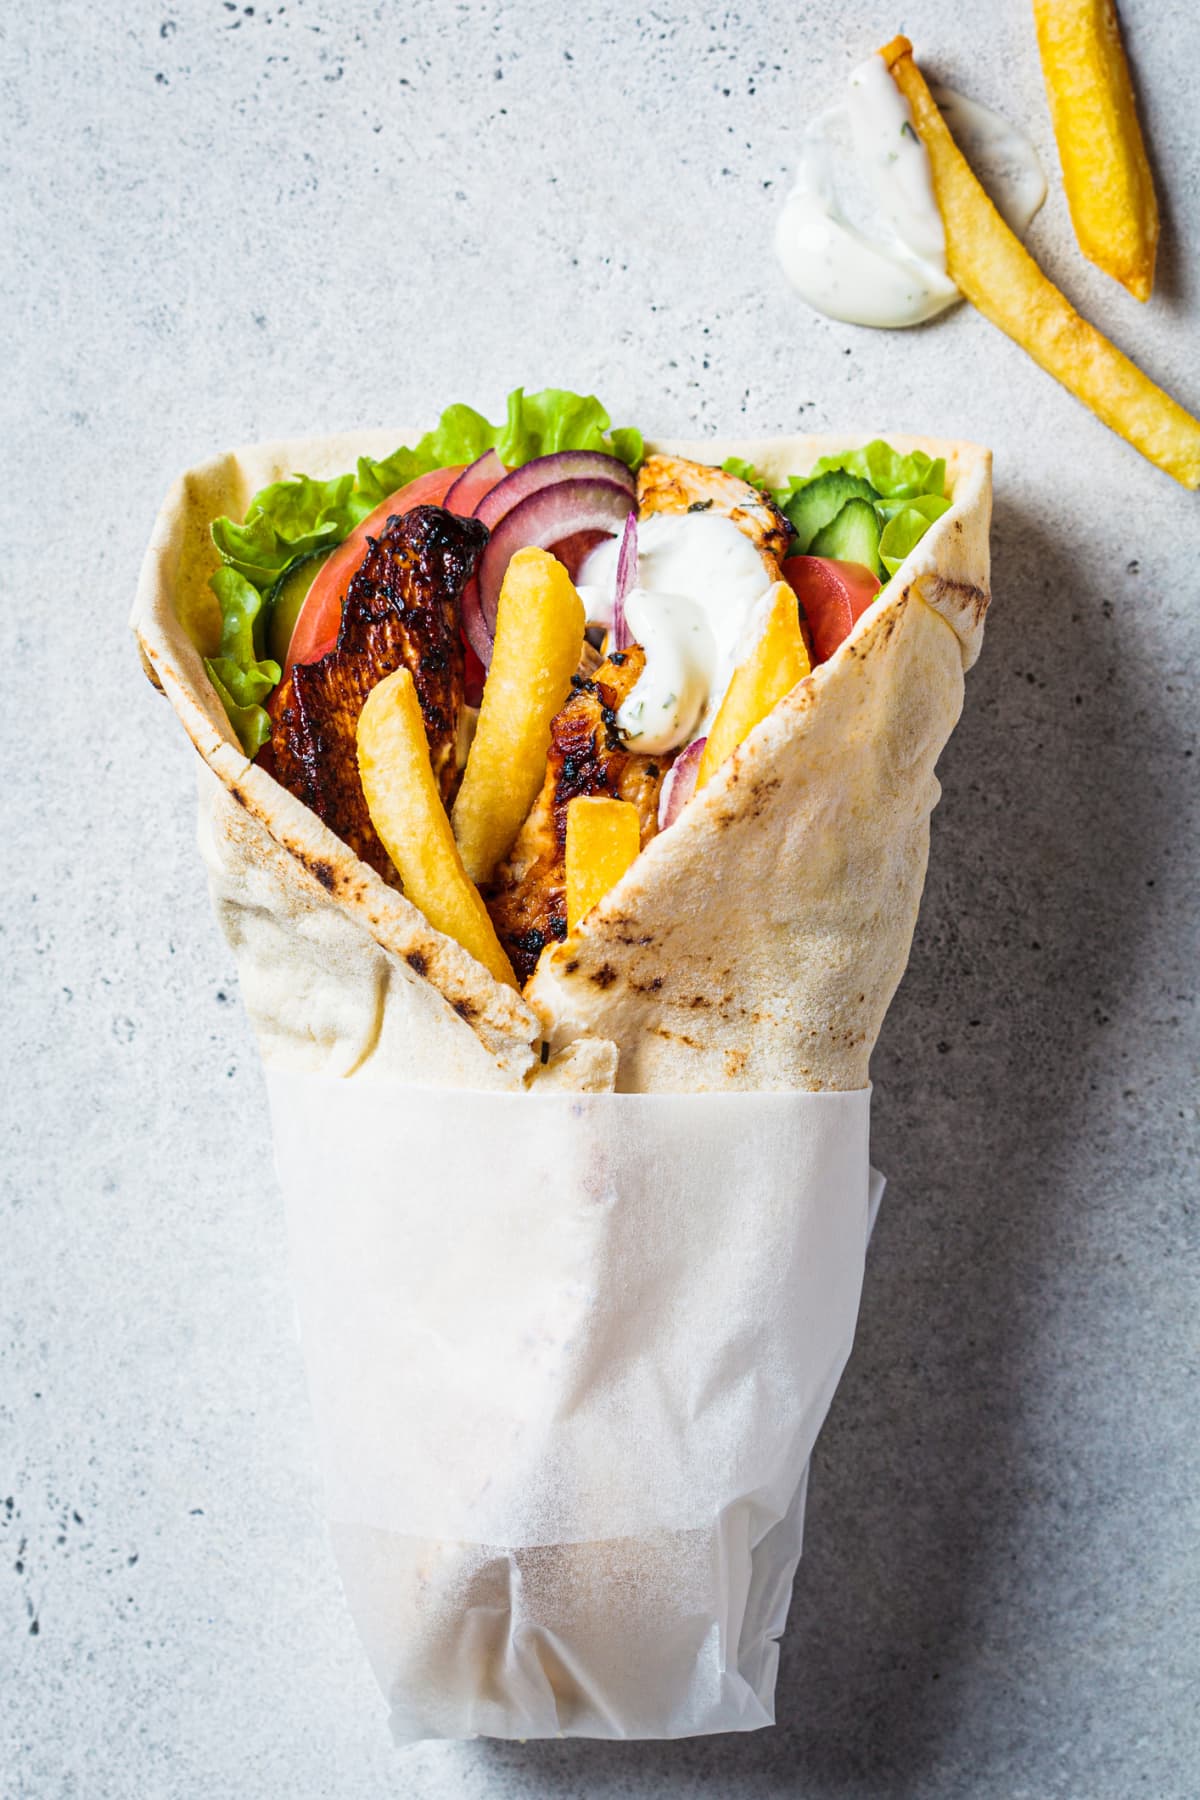 Chicken gyros with vegetables and french fries